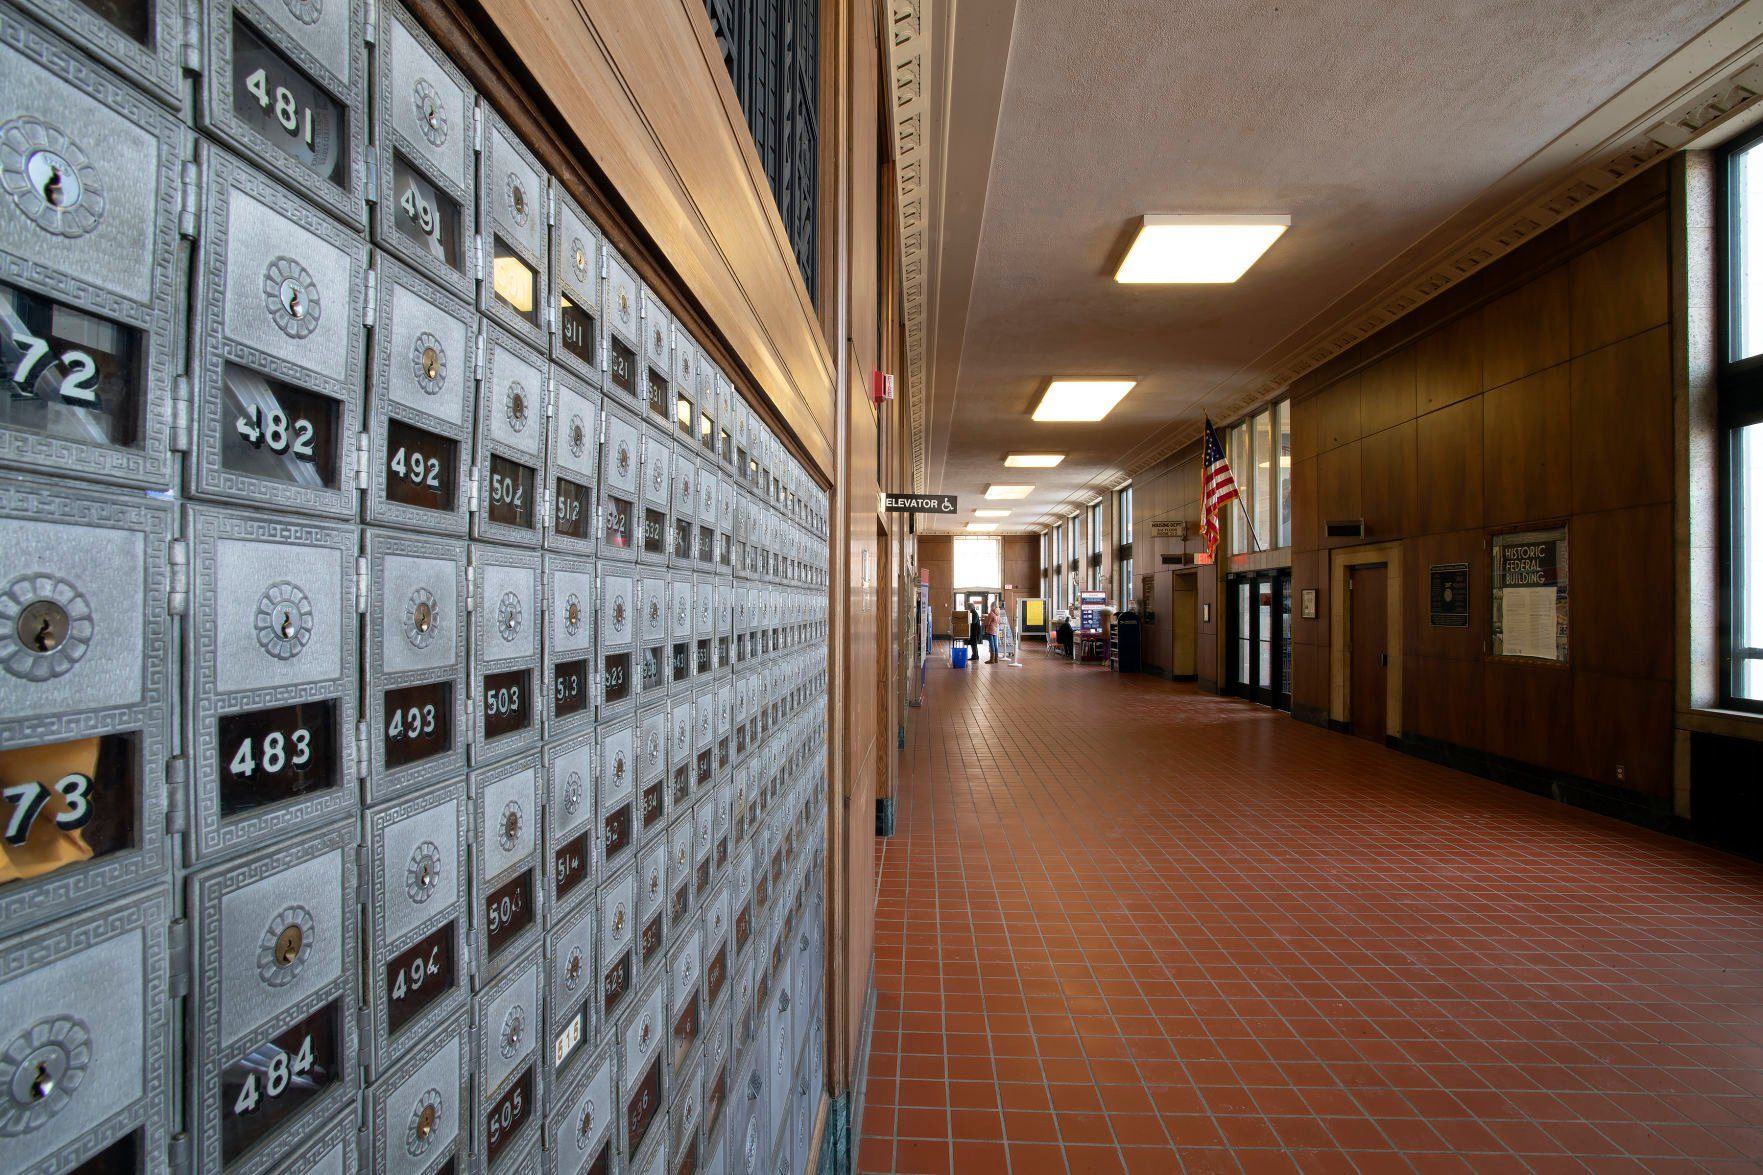 Post office boxes line the walls in the lobby of the post office located inside the historic Federal Building in Dubuque on Wednesday, Feb. 23, 2022.    PHOTO CREDIT: Stephen Gassman